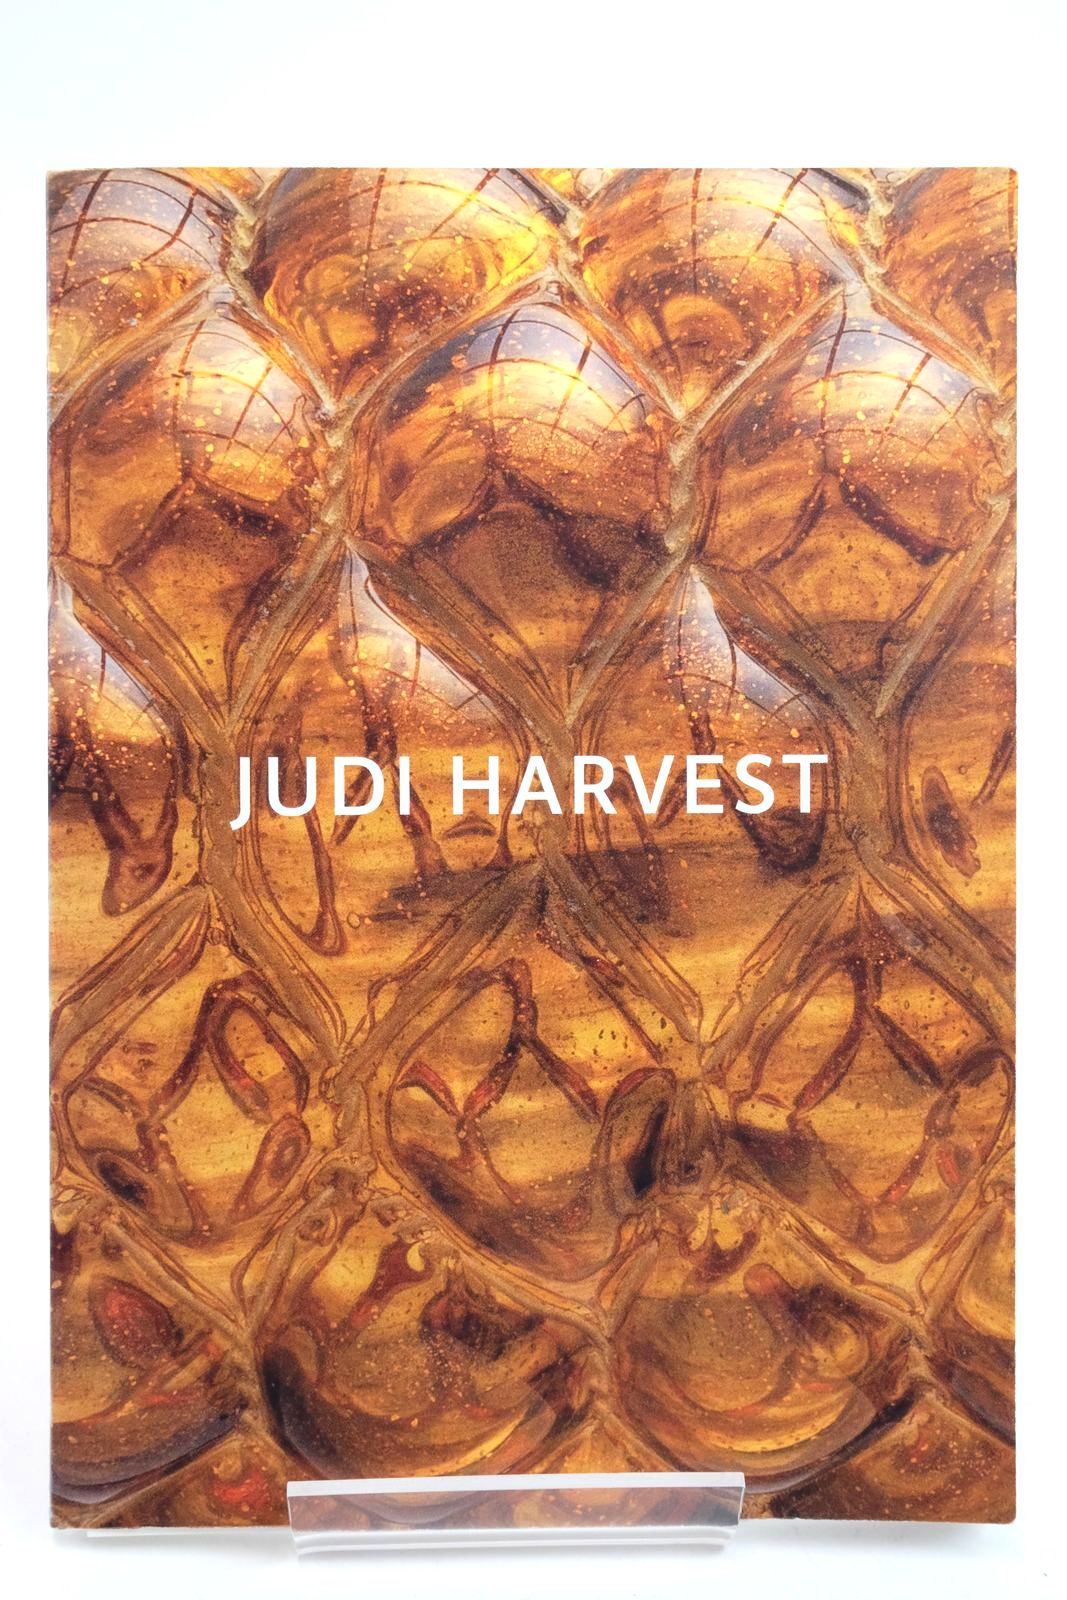 Photo of DENATURED HONEYBEES &amp; MURANO: JUDI HARVEST AND BEES WITHOUT BORDERS written by Vetrocq, Marcia E. Di Martino, Enzo published by Citta' Di Venezia (STOCK CODE: 2136002)  for sale by Stella & Rose's Books